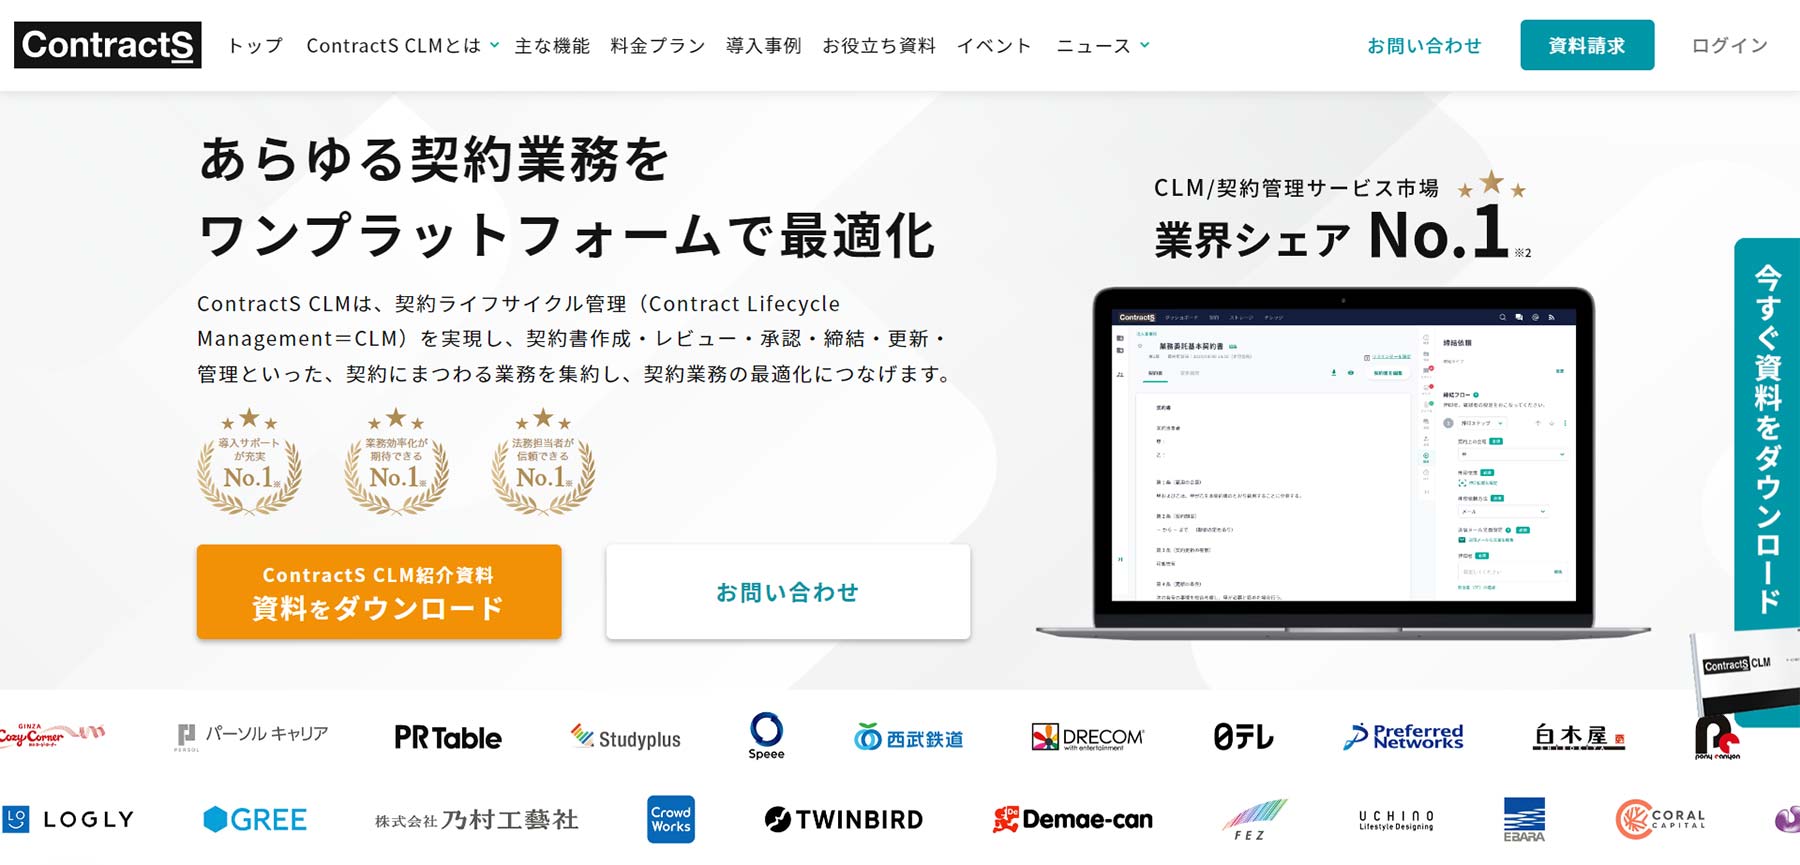 ContractS CLM公式Webサイト